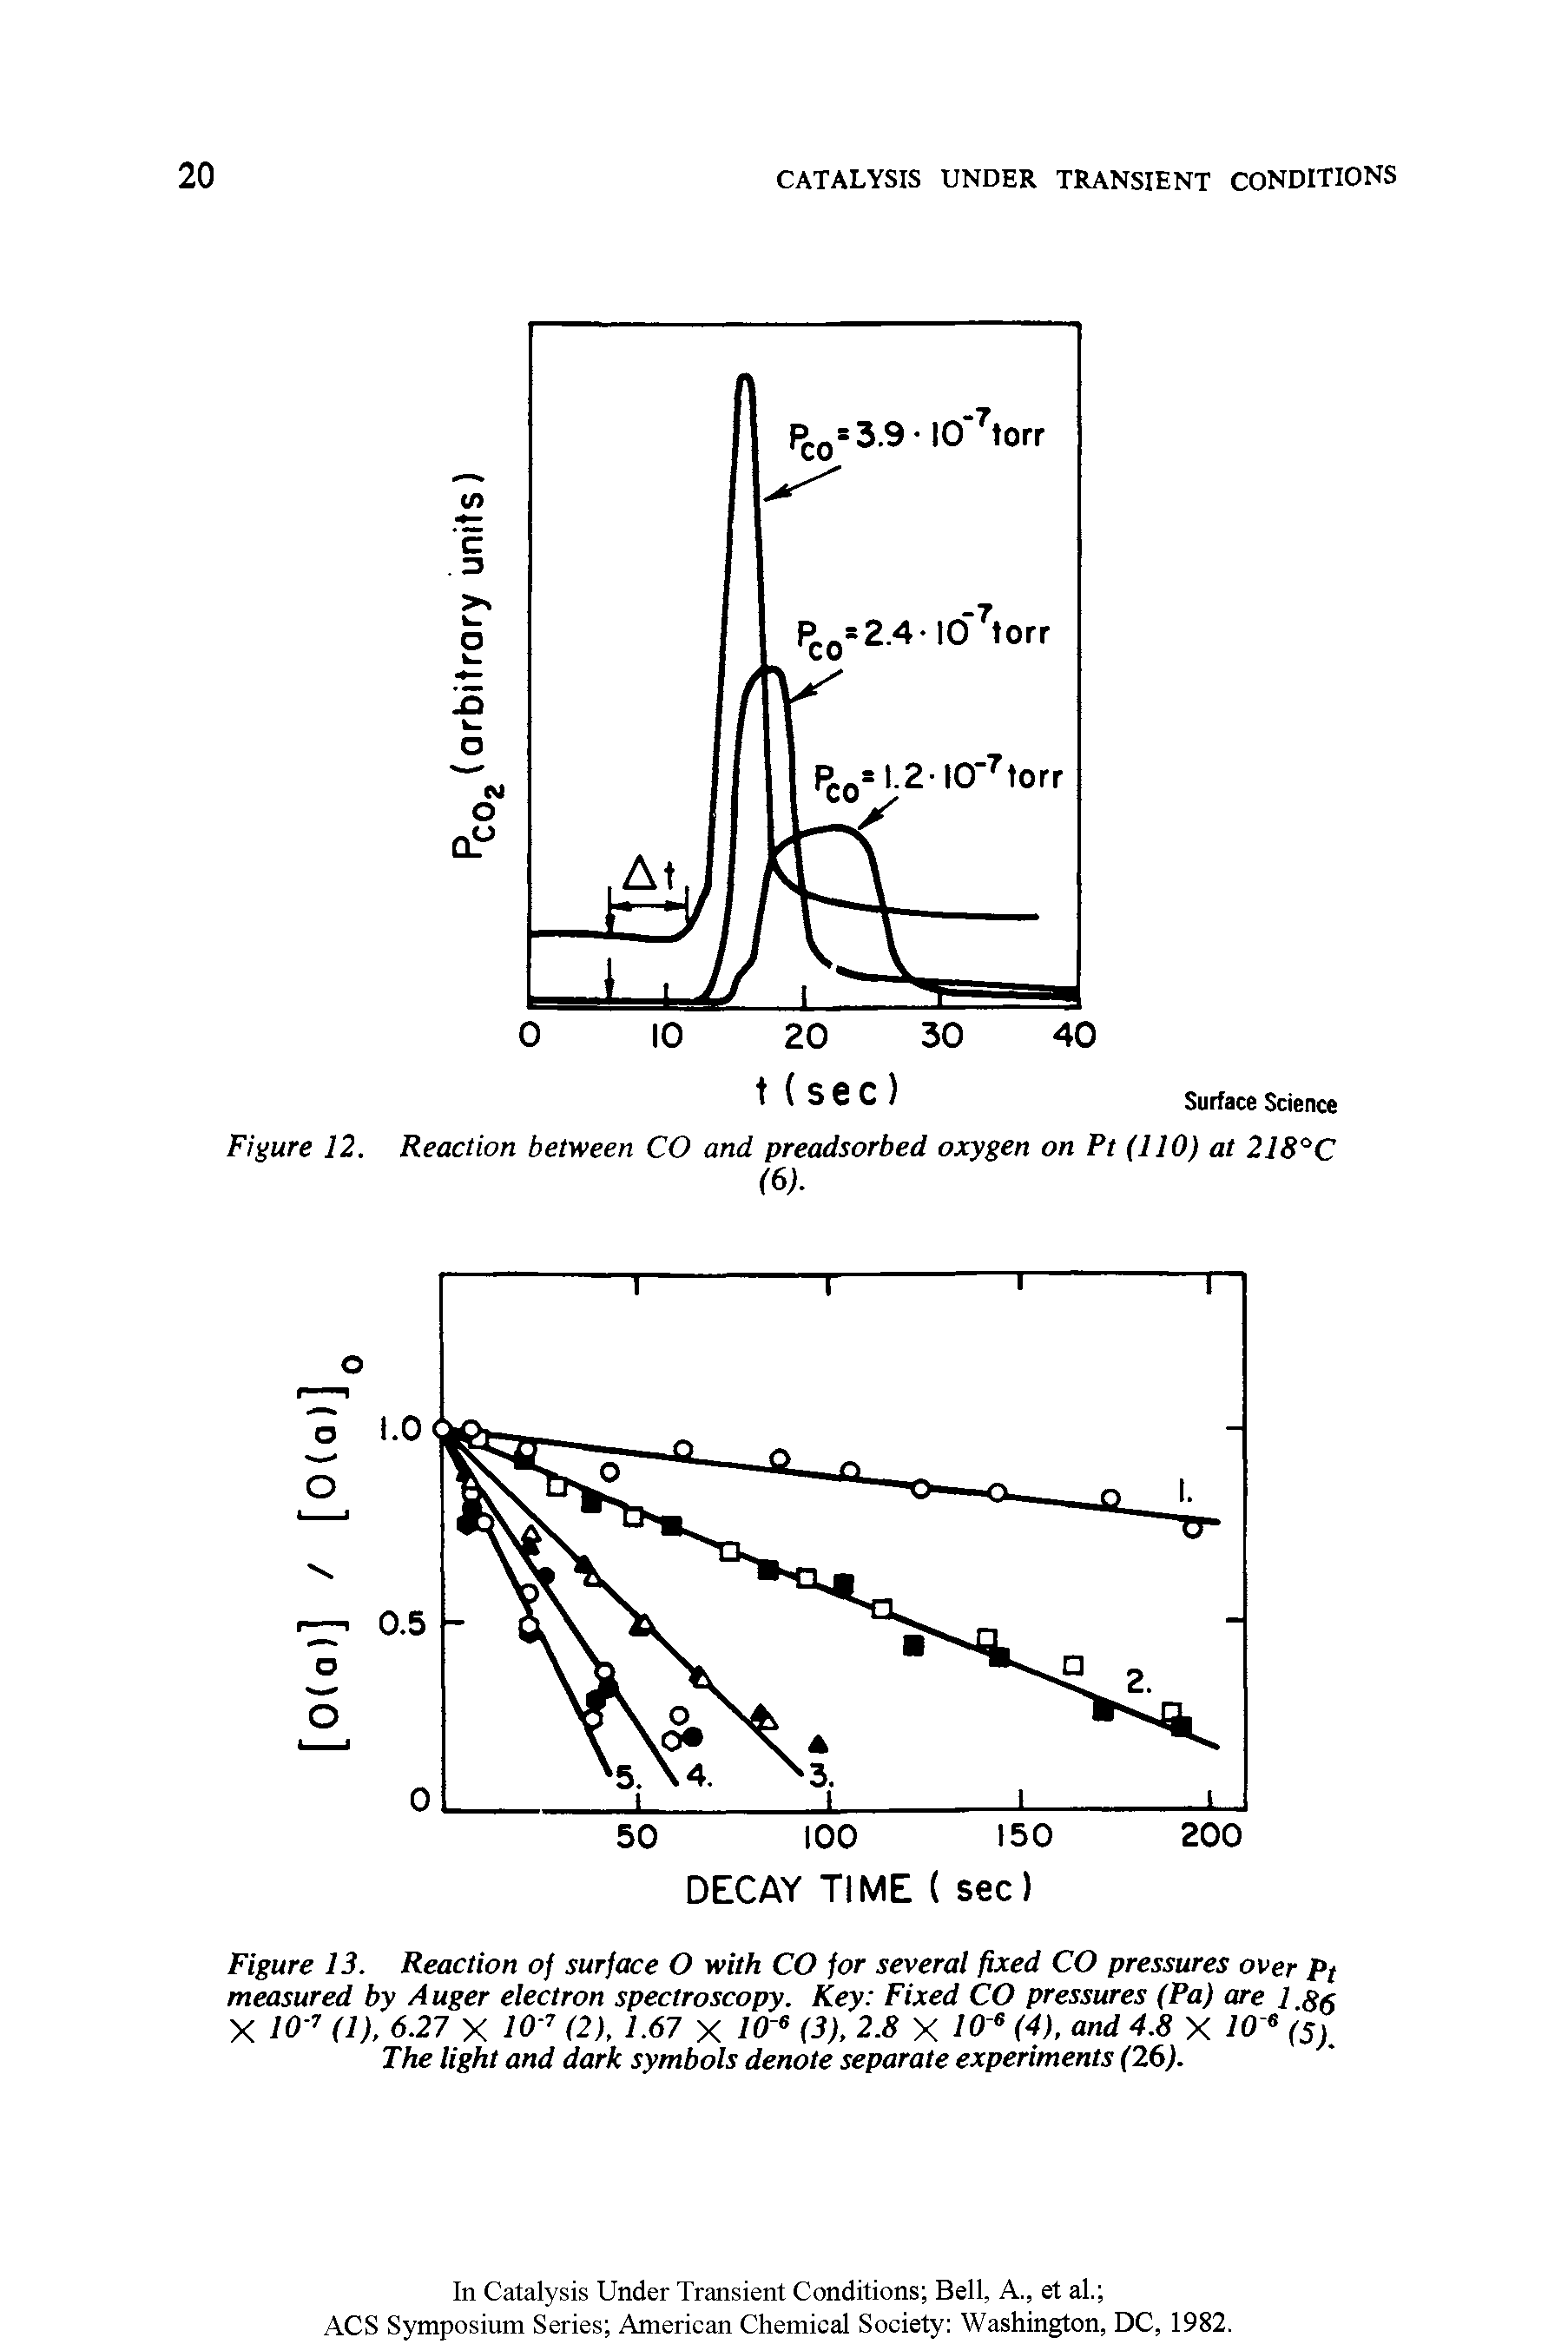 Figure 13. Reaction of surface O with CO for several fixed CO pressures over Pt measured by Auger electron spectroscopy. Key Fixed CO pressures (Pa) are 1 < X 10-7 (1), 6.27 X 10 7 (2). 1.67 X 10 s (3), 2.8 X 10 s (4), and 4.8 X 10 s (5) The light and dark symbols denote separate experiments (26).